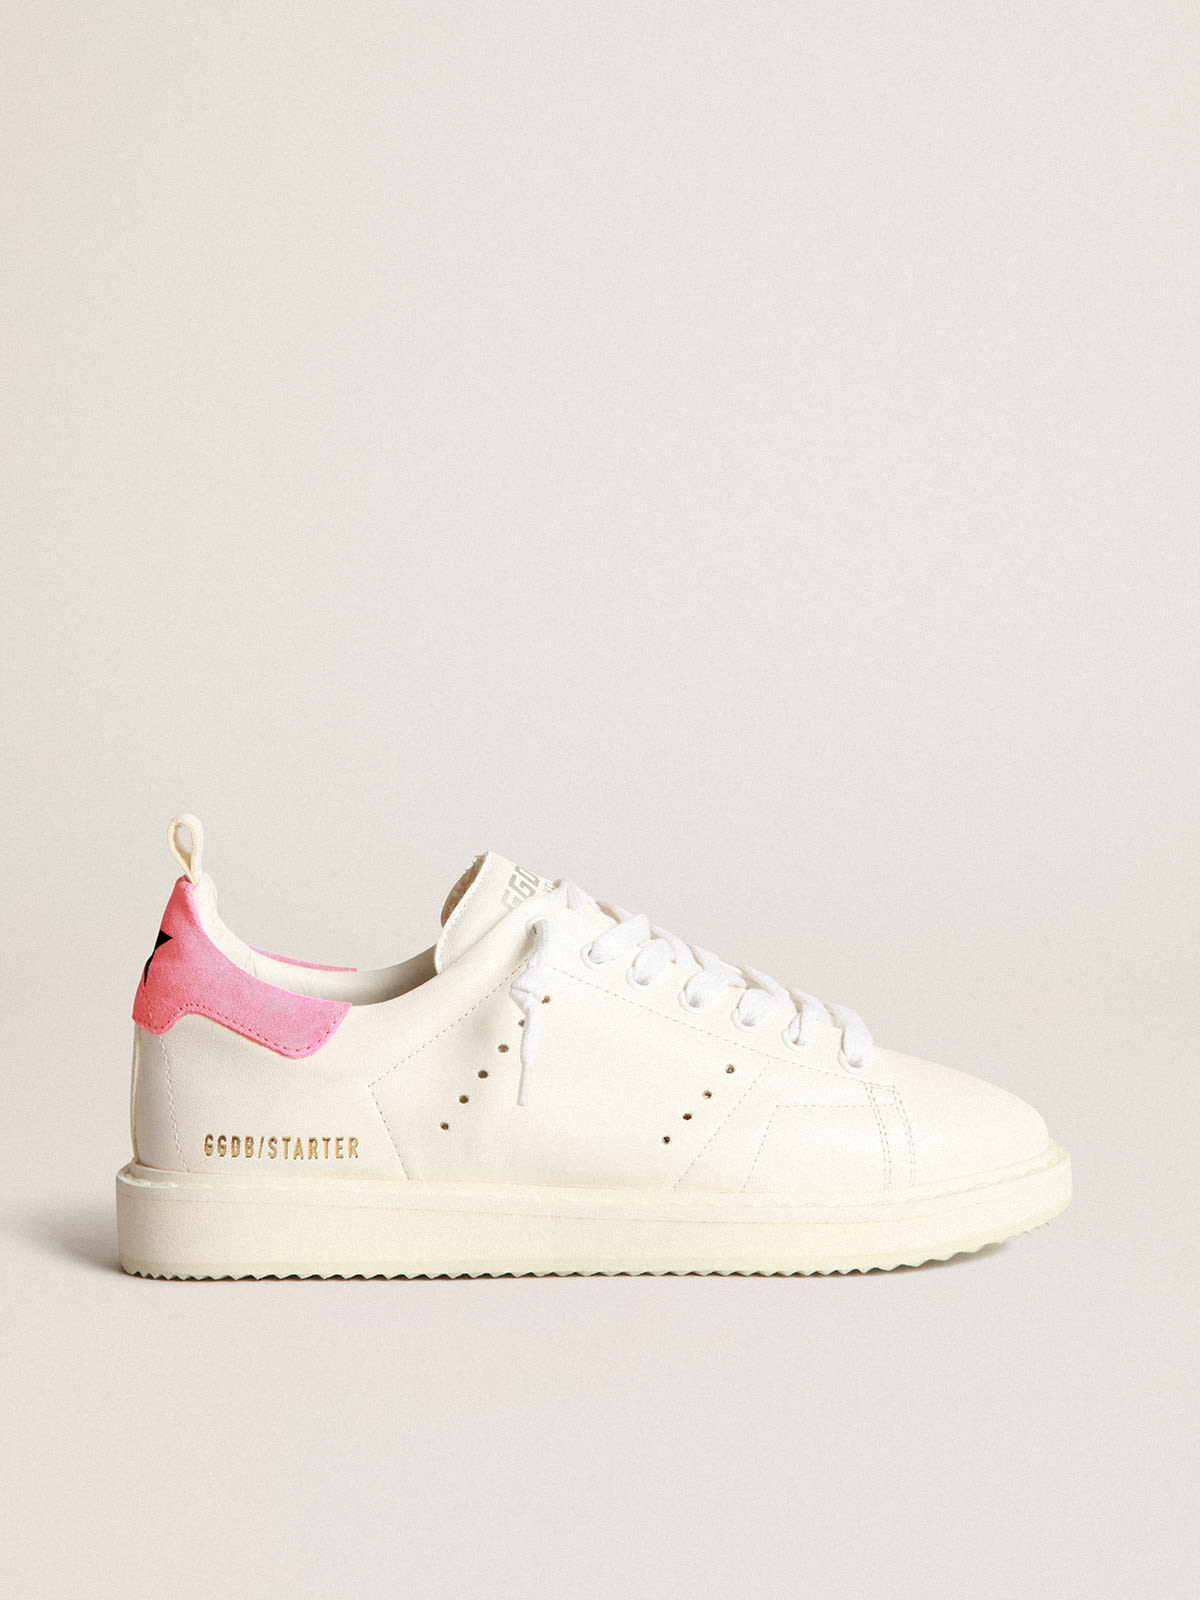 Golden Goose - Starter sneakers in white nappa leather with pink suede heel tab in 